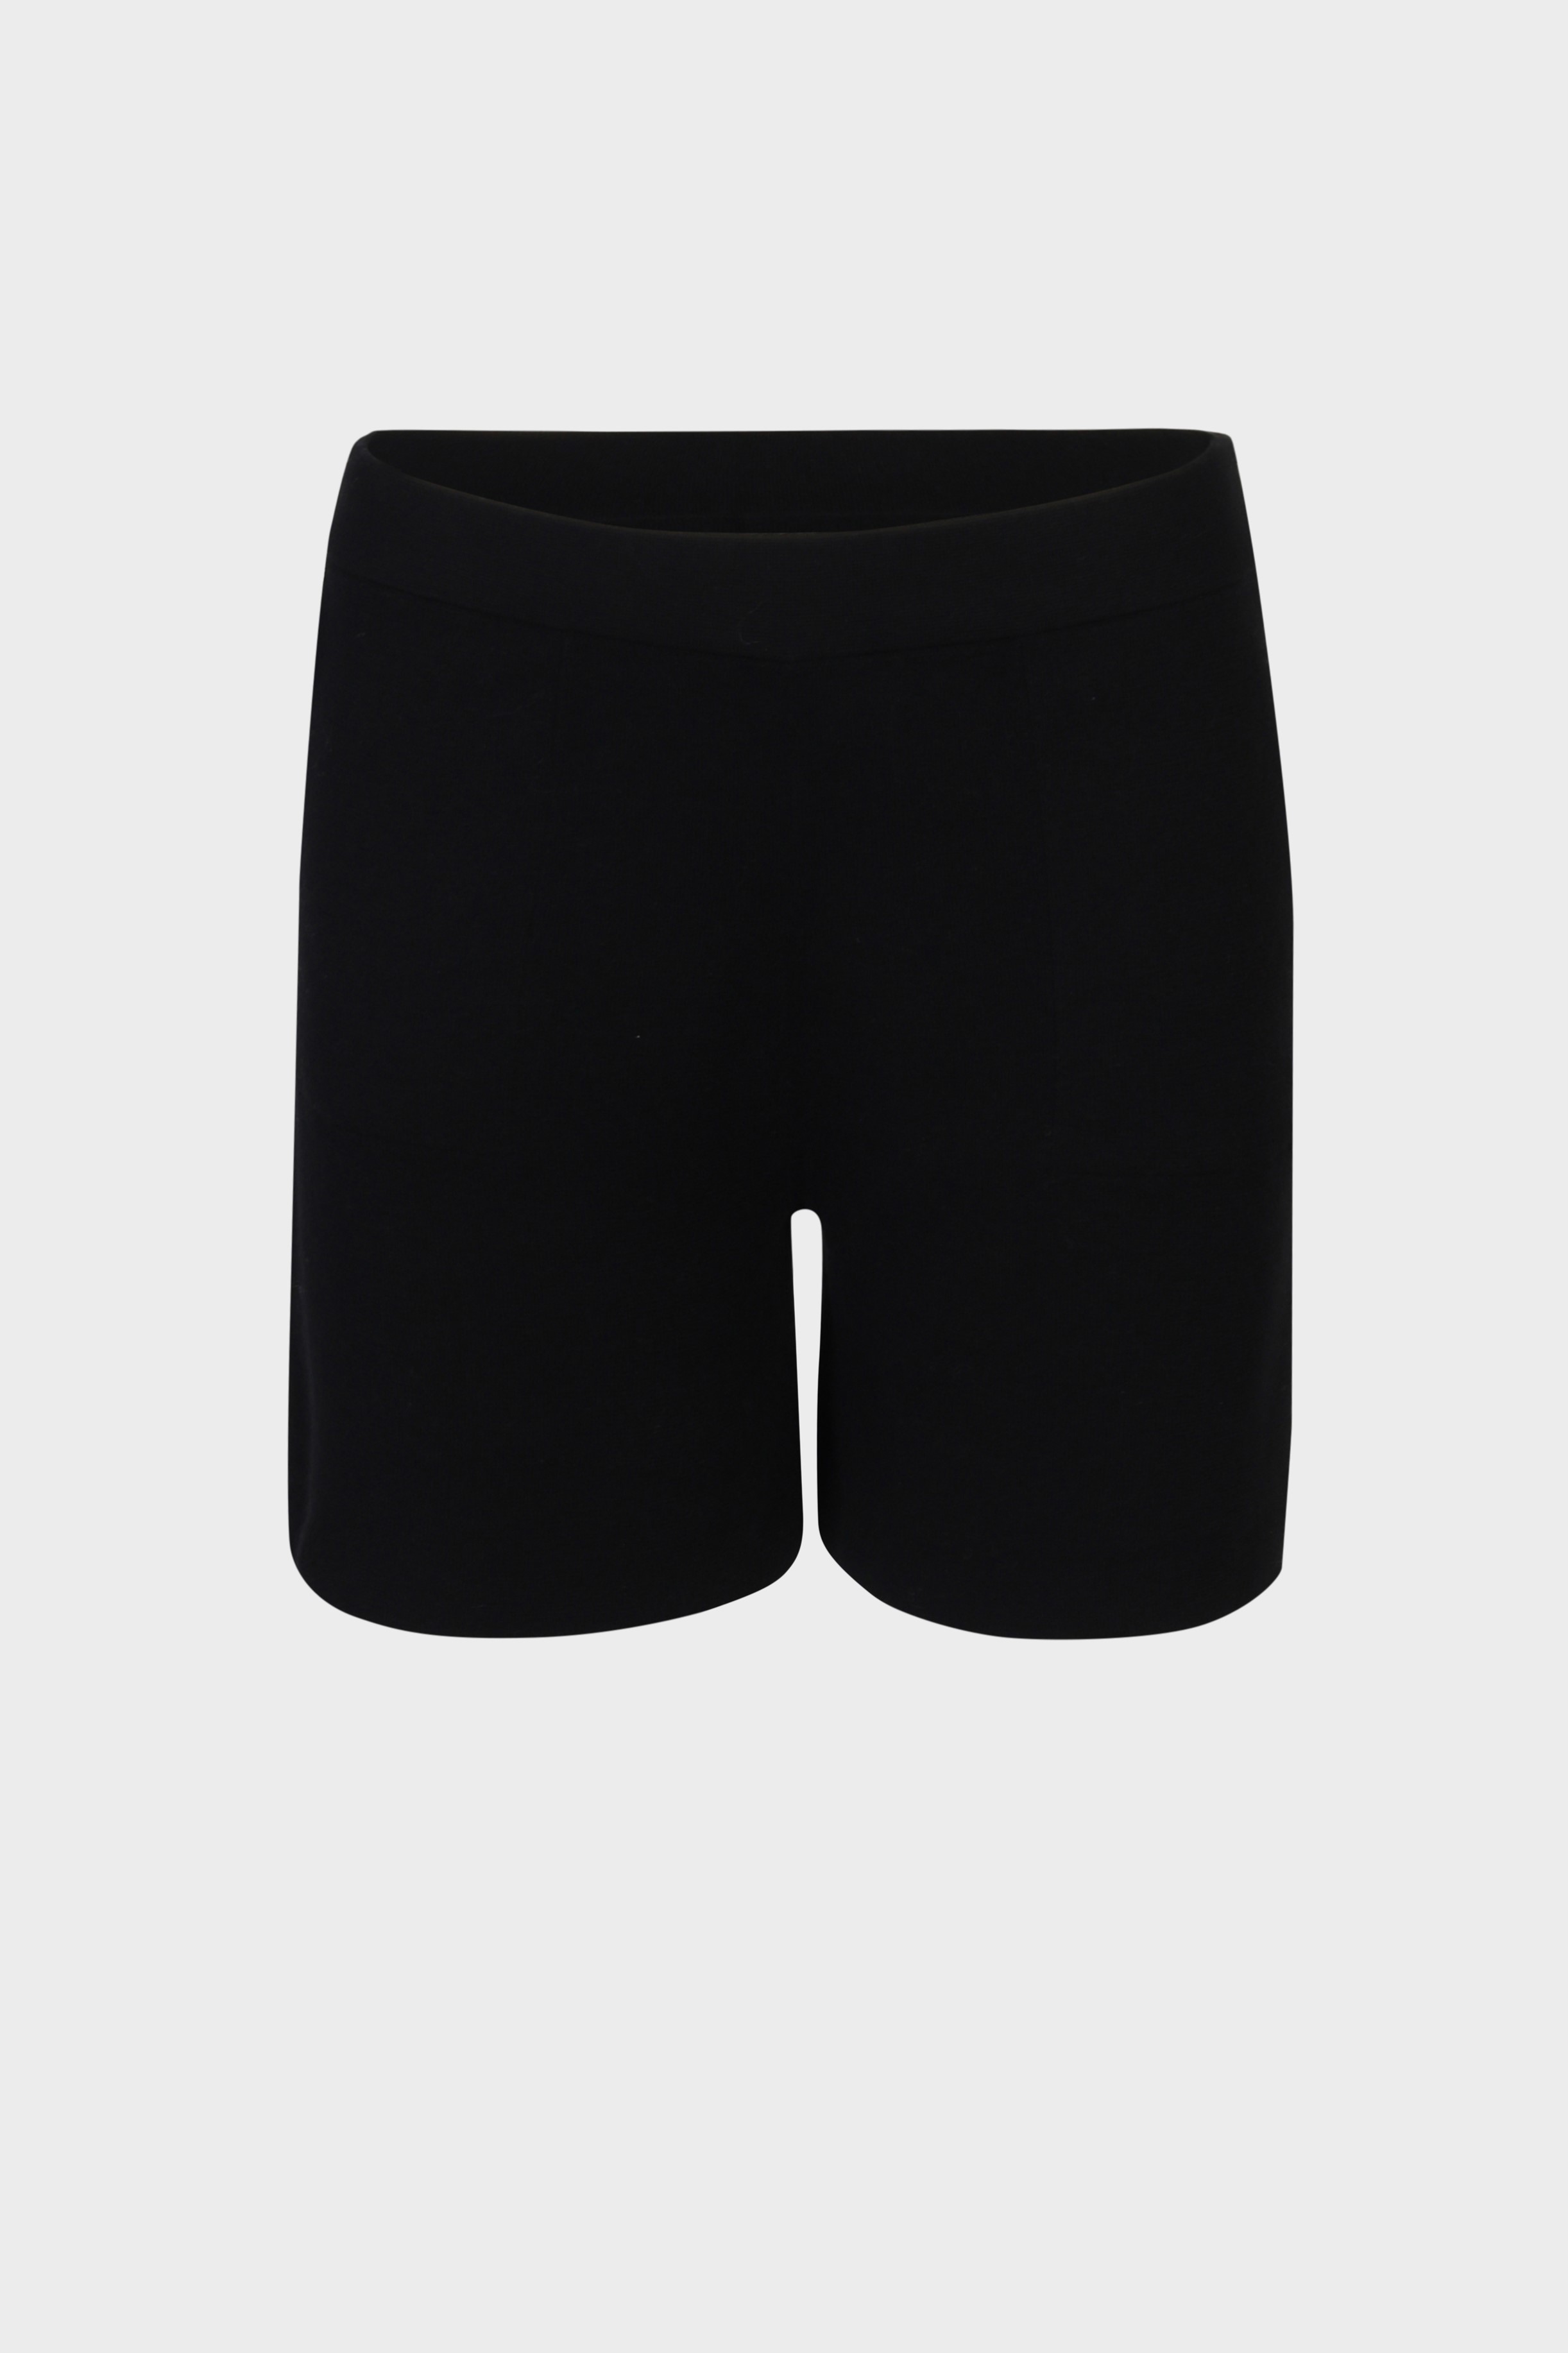 SMINFINITY Comfy Knit Shorts in Black  XS/S